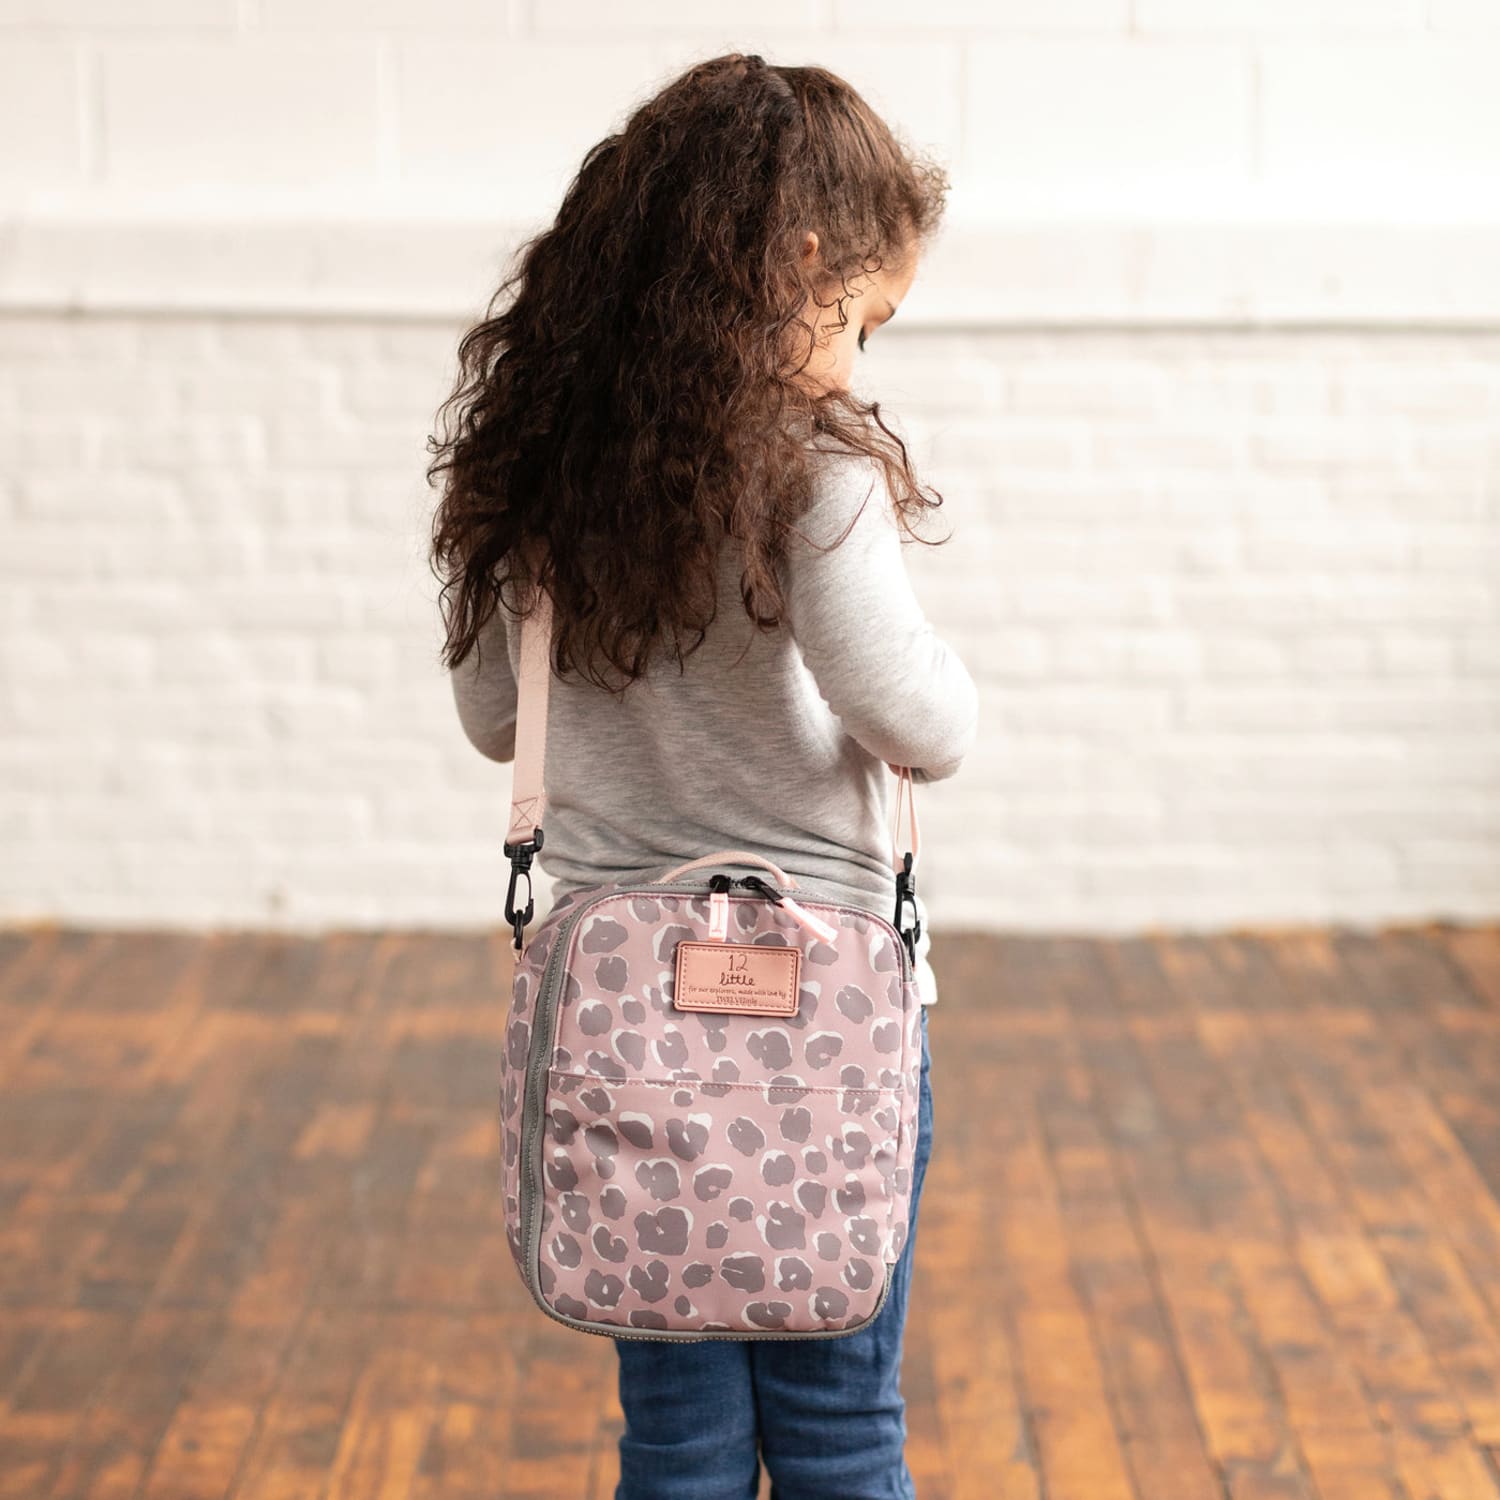 10 Cute (But Not Cutesy) Insulated Kids’ Lunch Bags That Might Even Last Into the Teen Years